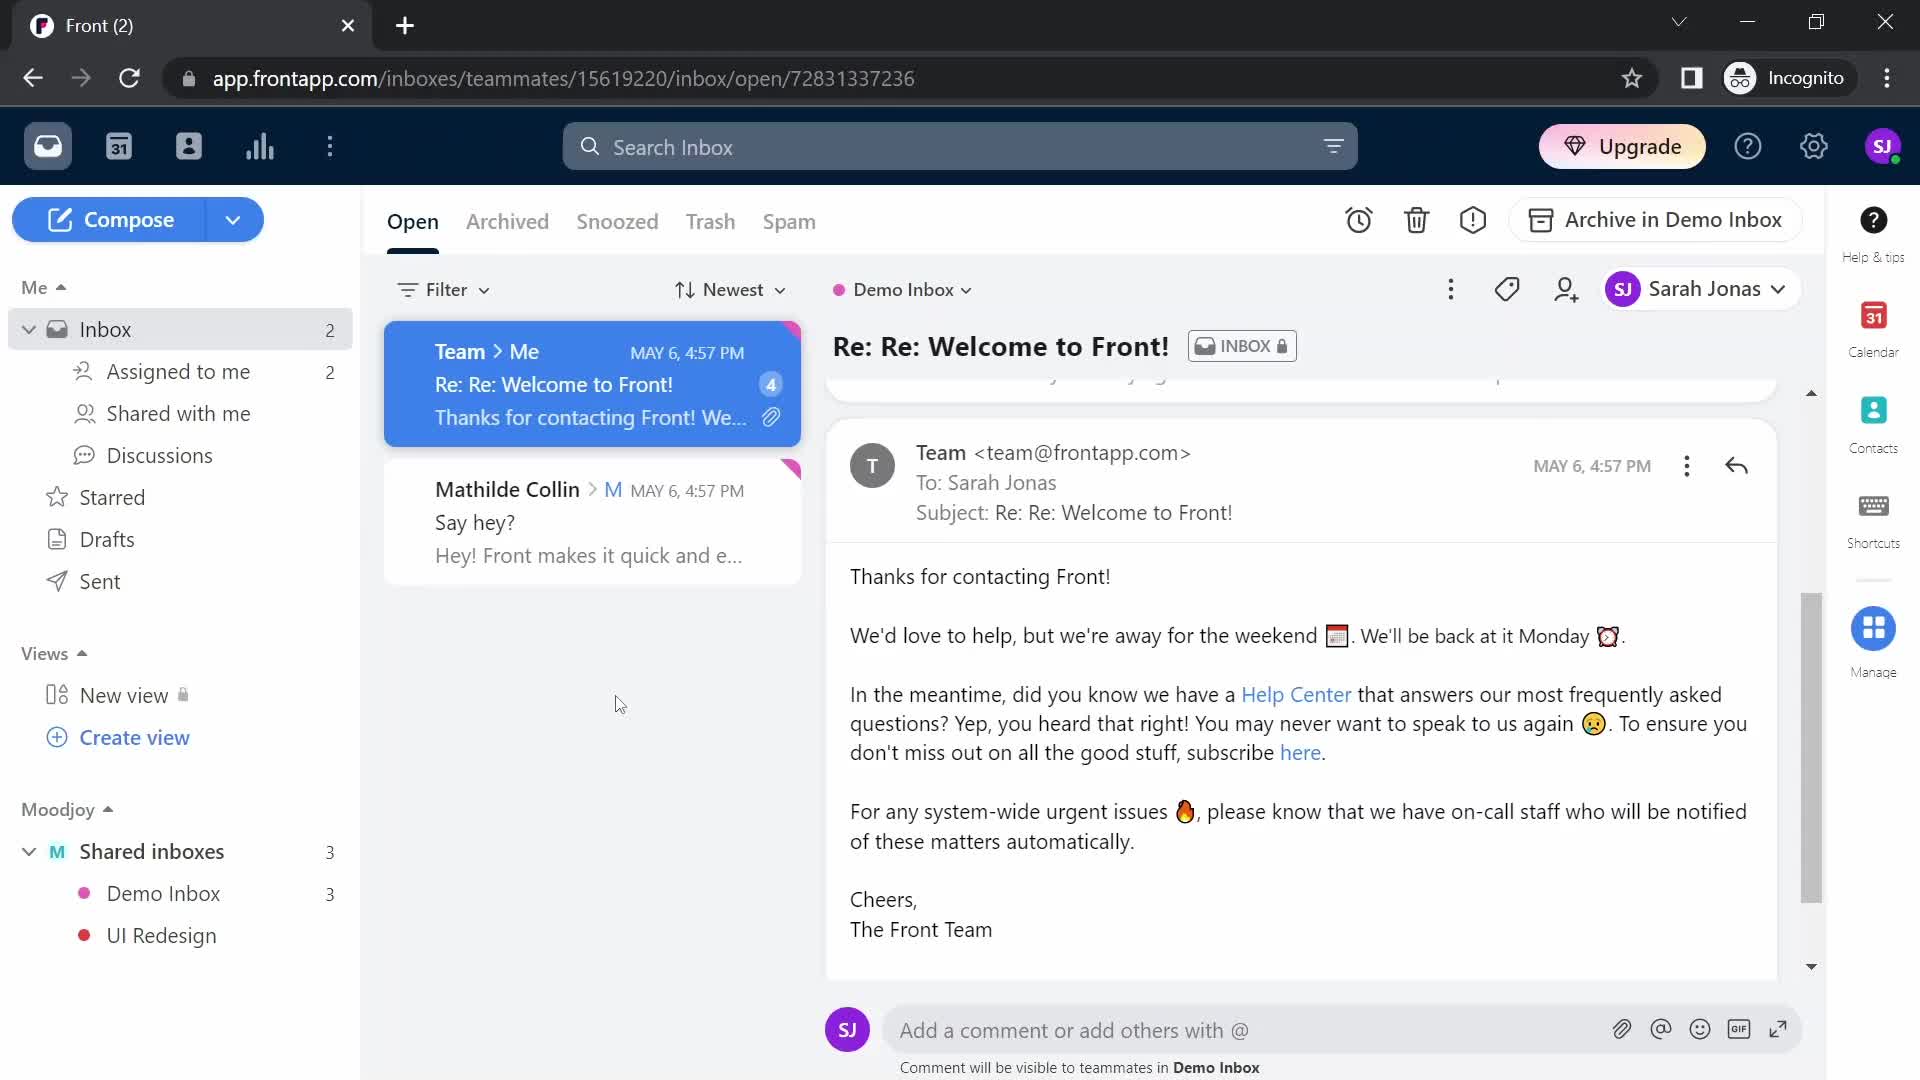 Screenshot of Inbox on Inviting people on Front user flow